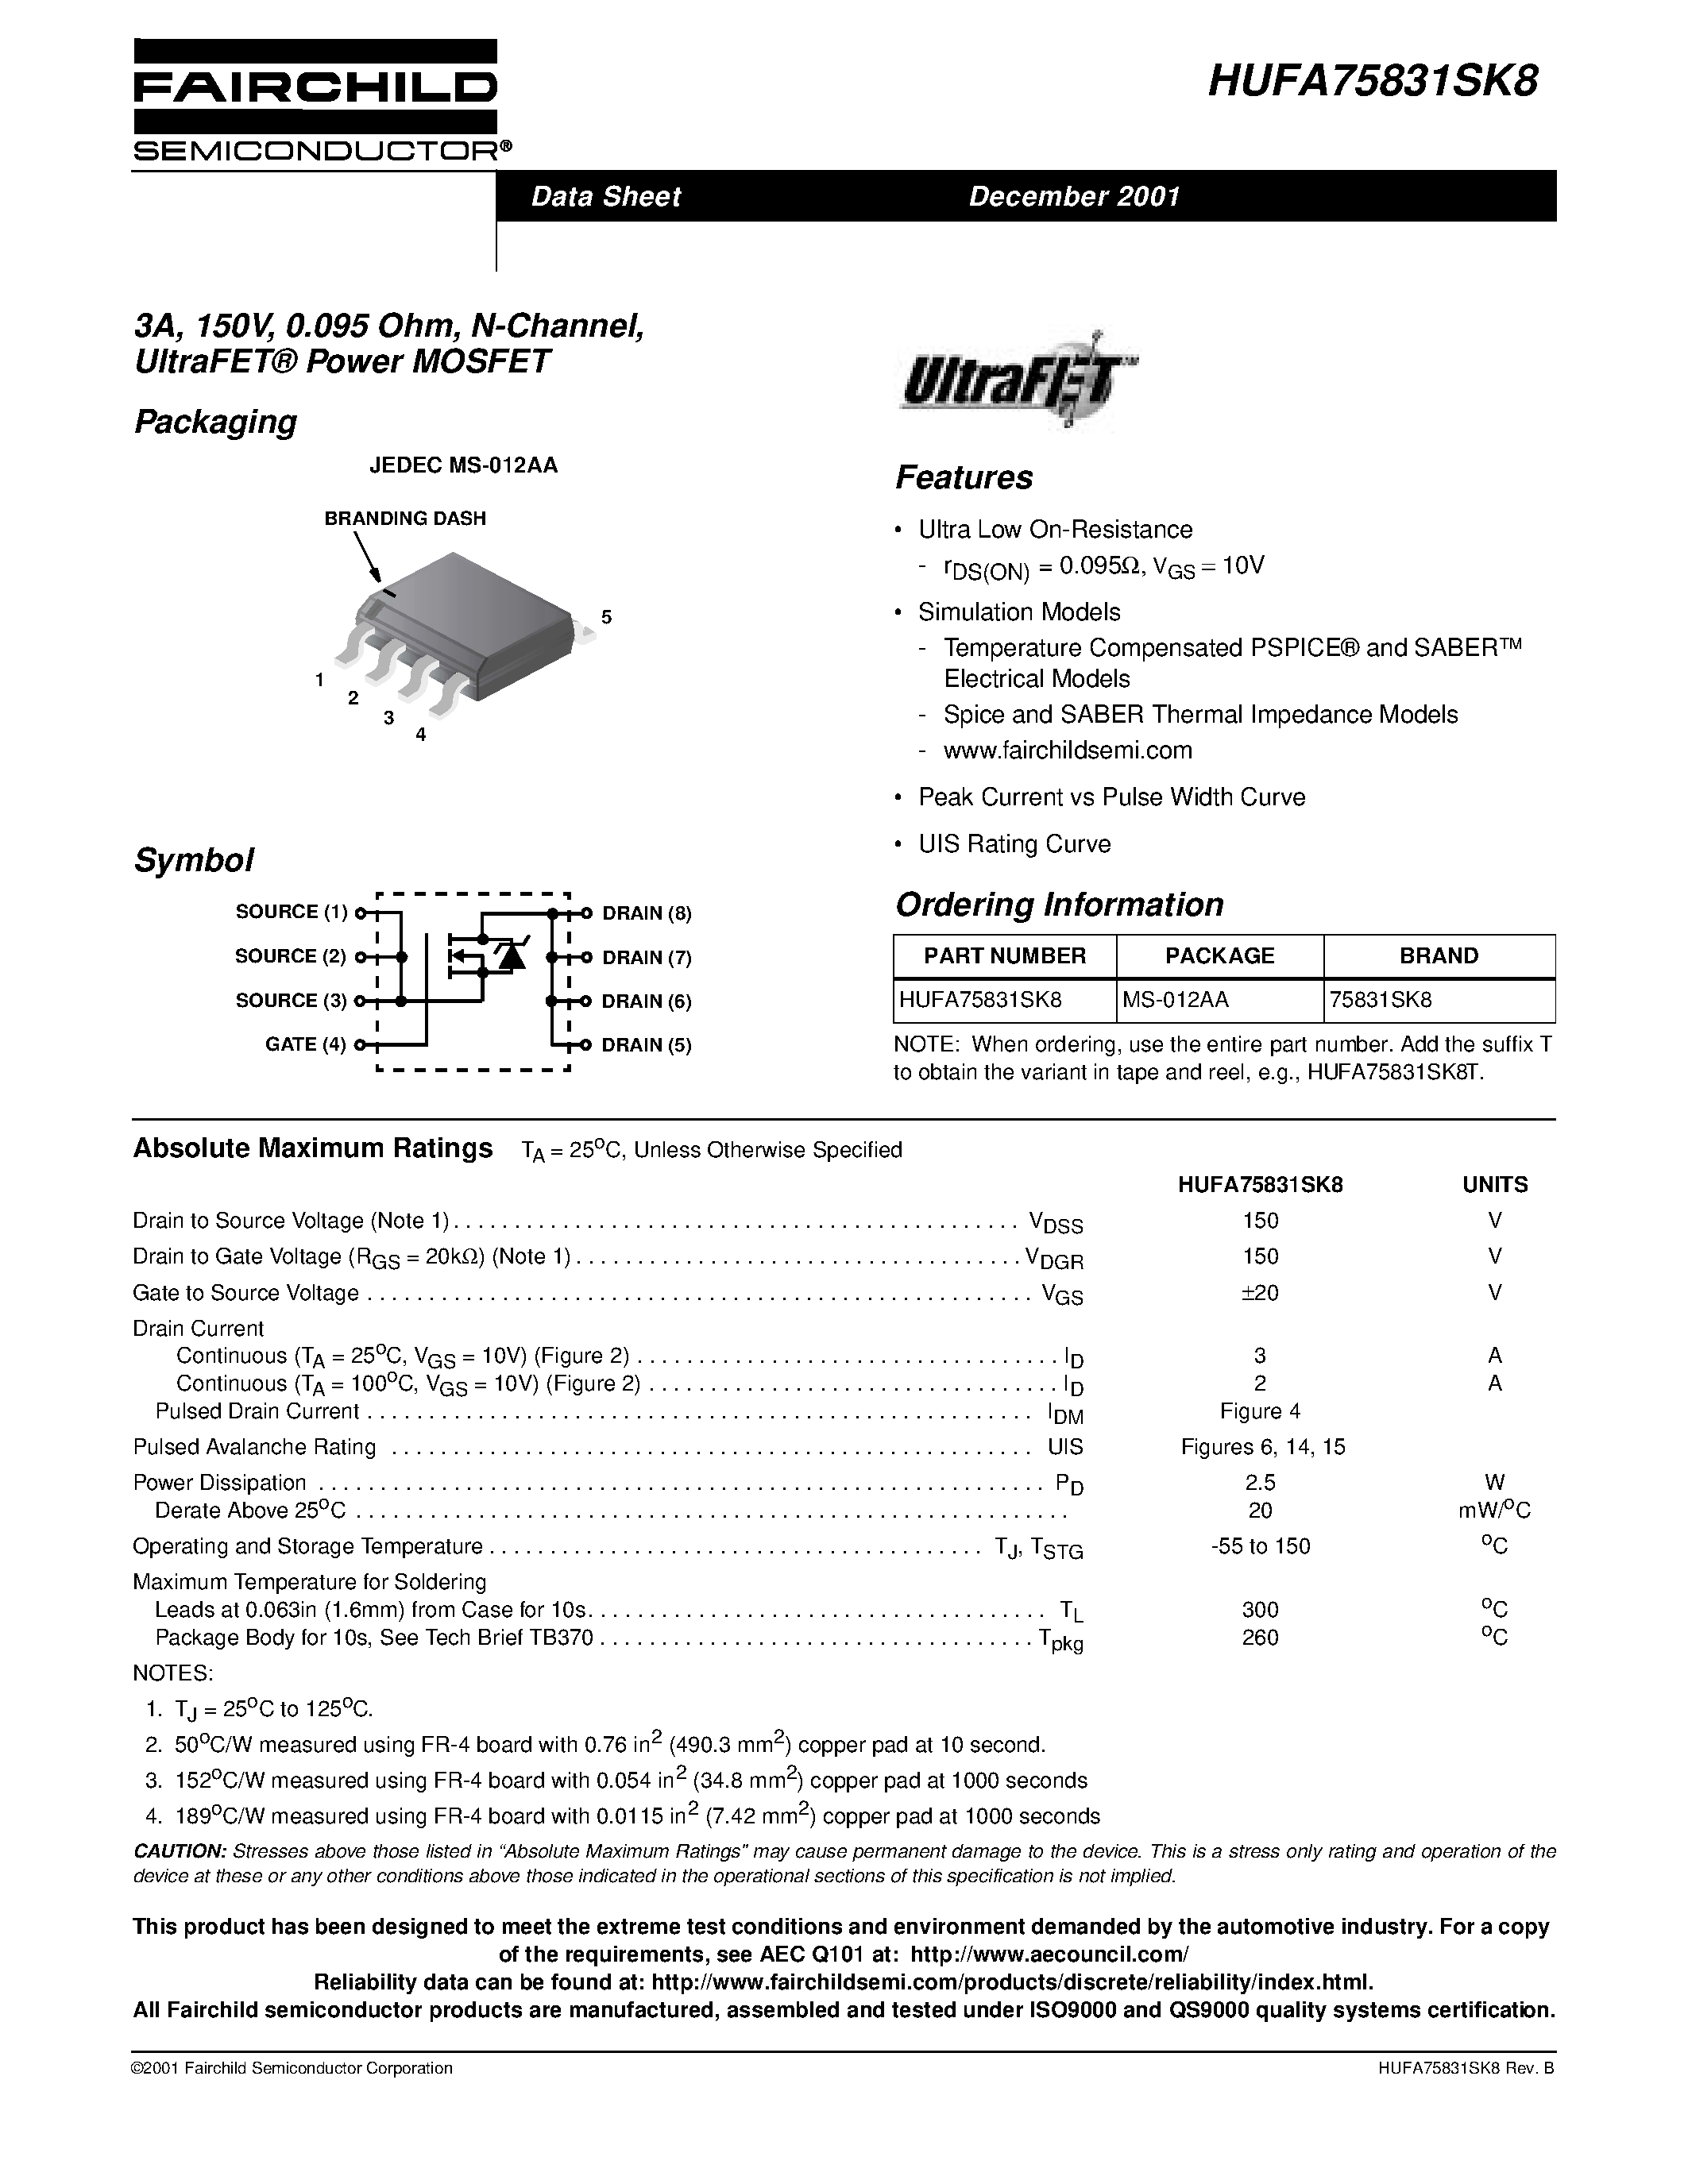 Datasheet HUFA75831SK8 - 3A/ 150V/ 0.095 Ohm/ N-Channel/ UltraFET Power MOSFET page 1